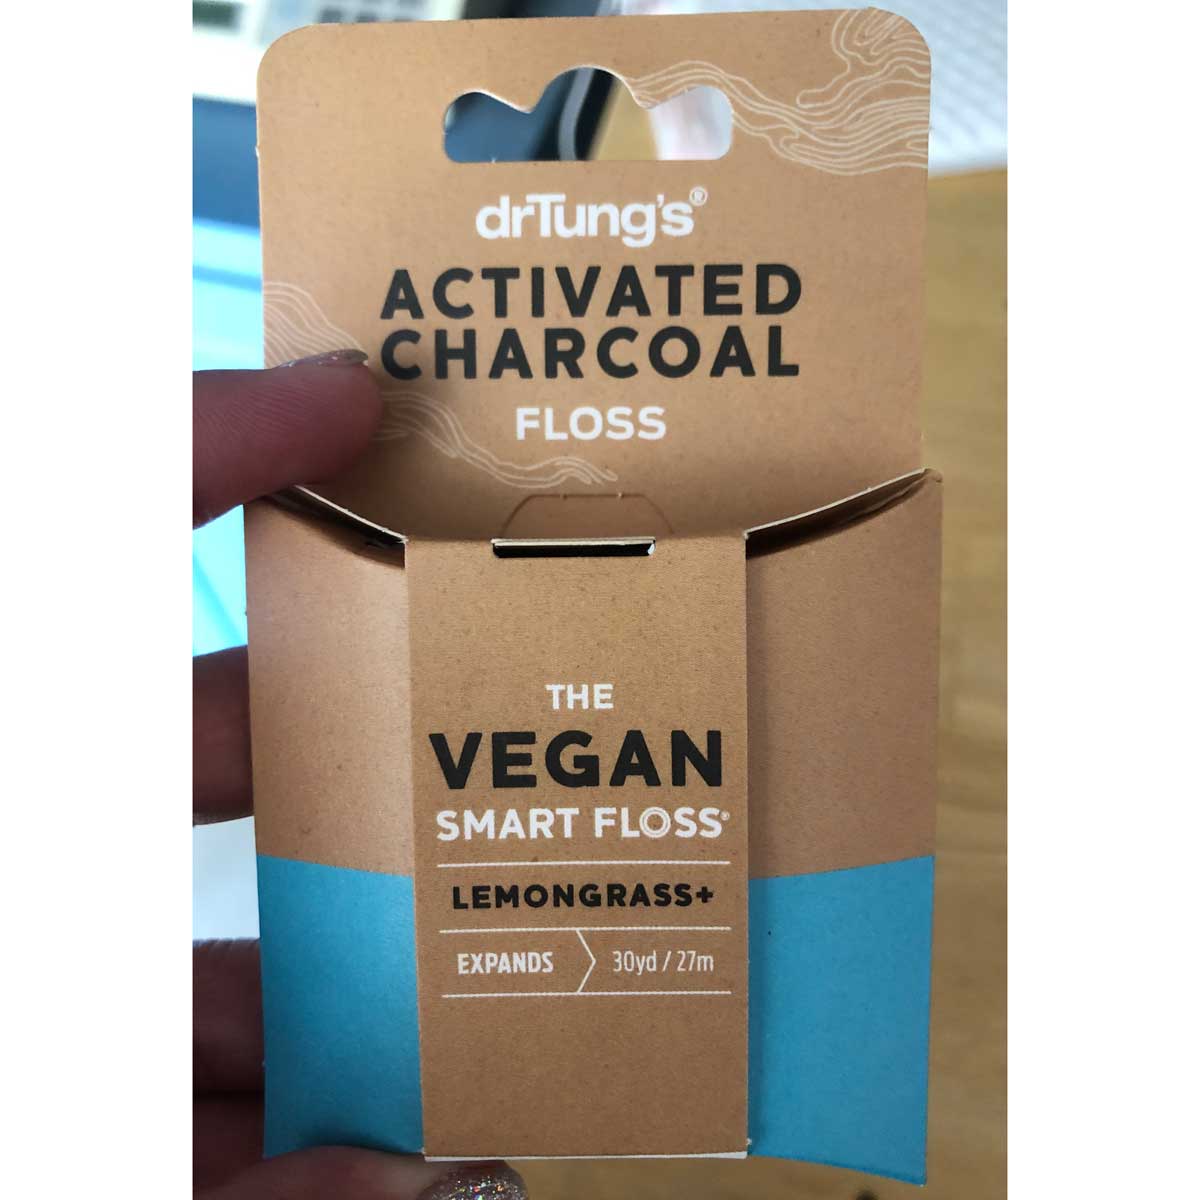 Dr. Tung's Activated Charcoal Floss – 30yds - Vegan